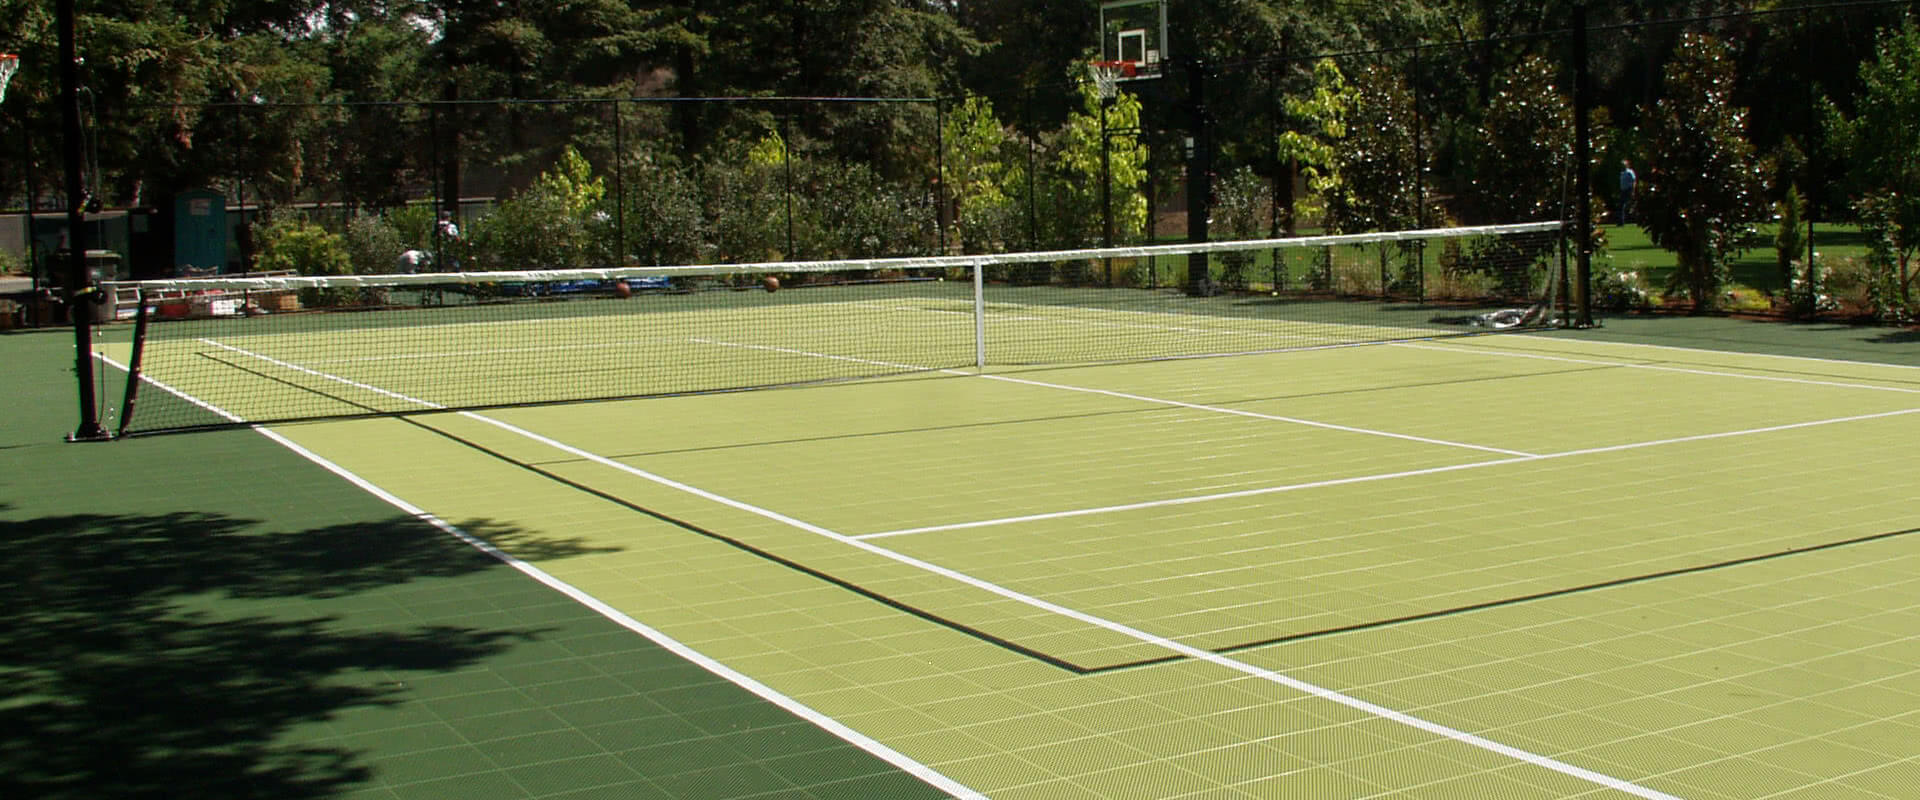 Tennis Courts | Outdoor Residential & Commercial Photo Gallery